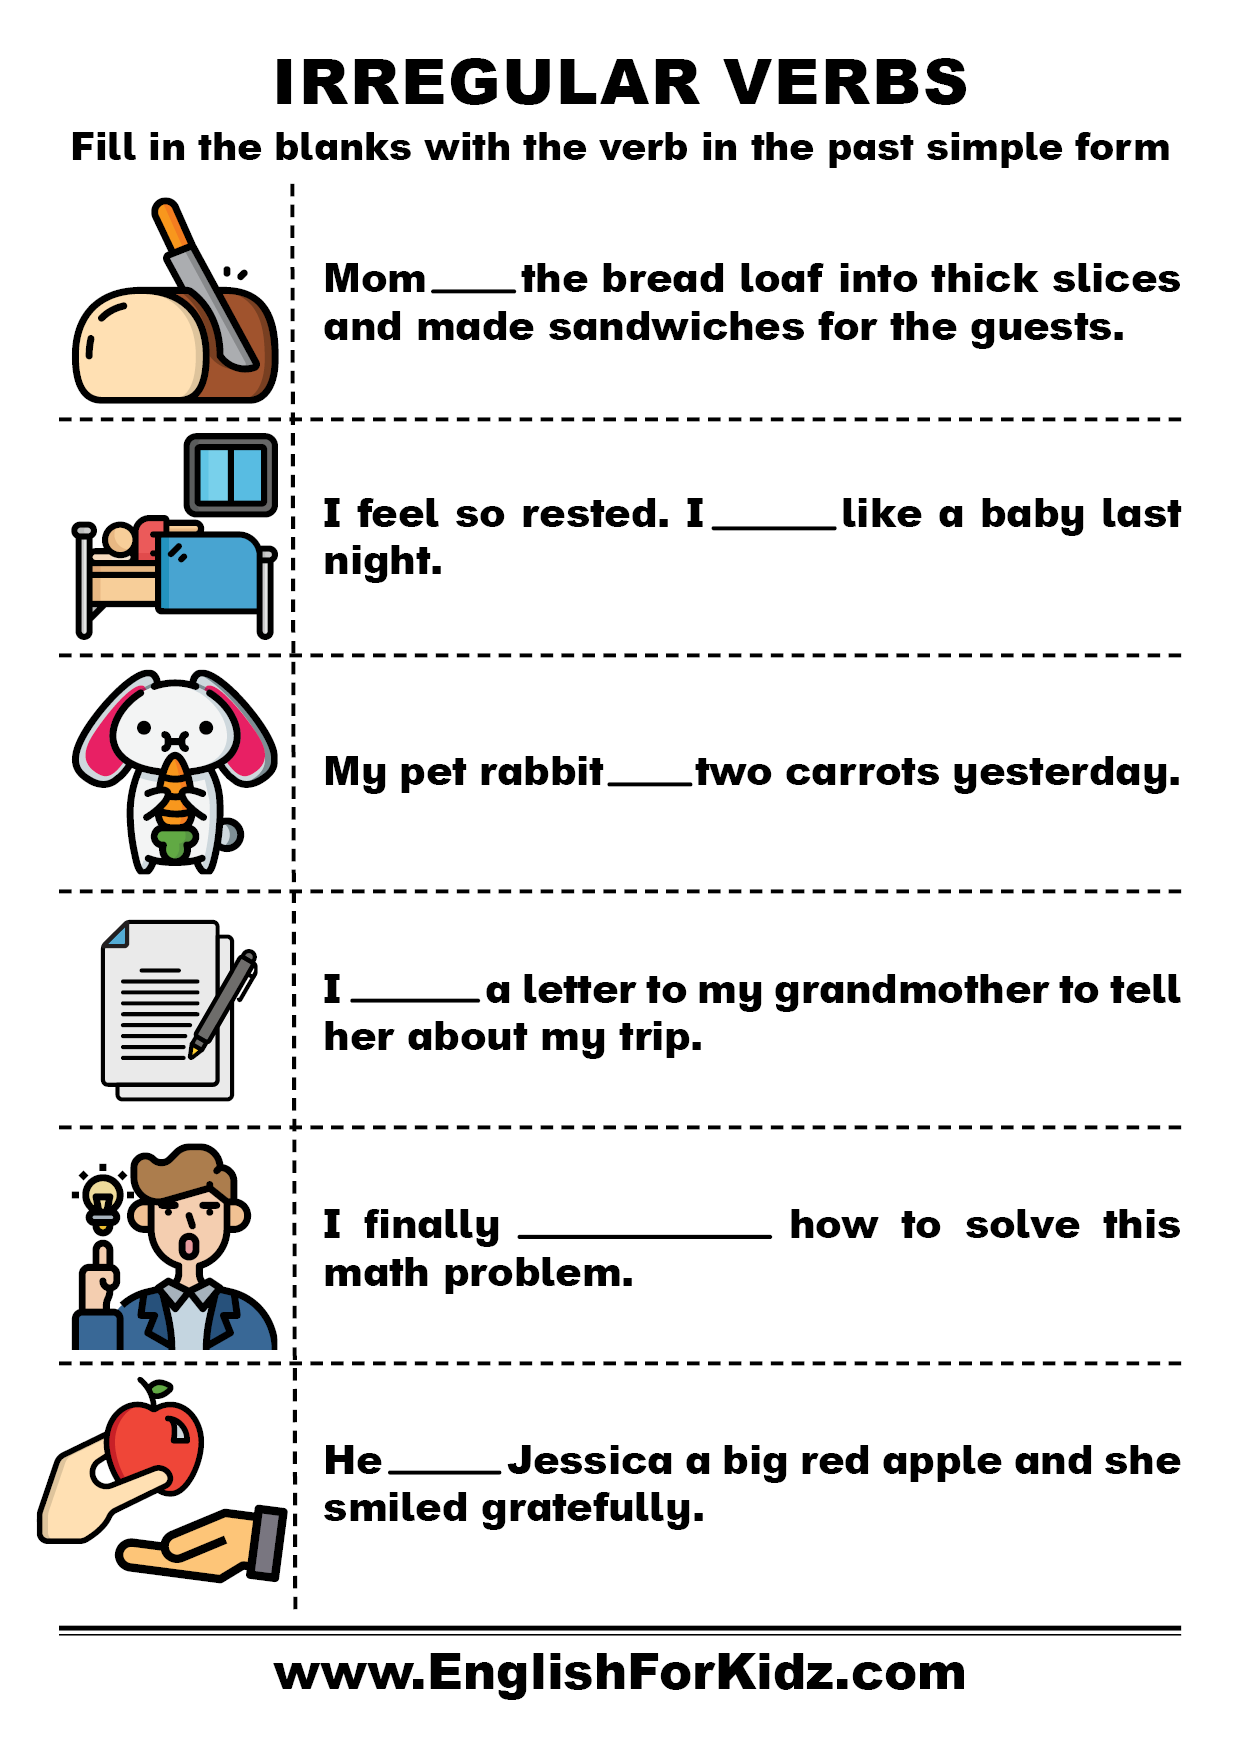 verbs-in-past-tense-english-esl-worksheets-for-distance-learning-and